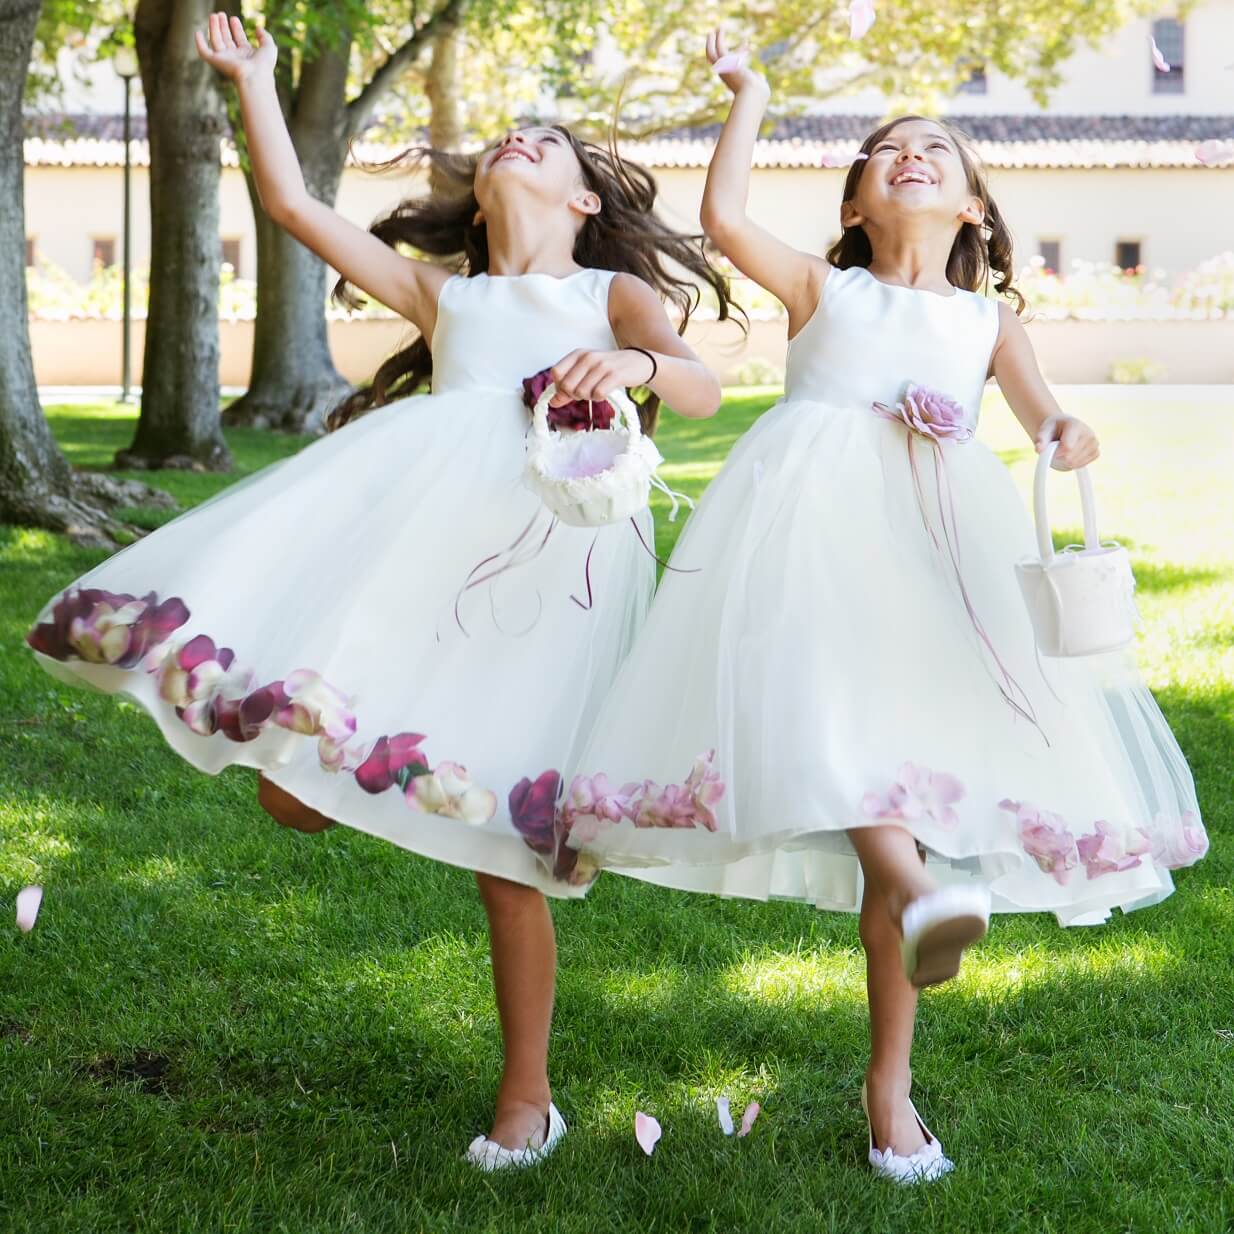 Girls in a garden wearing white stain dresses from The Fairy Princess